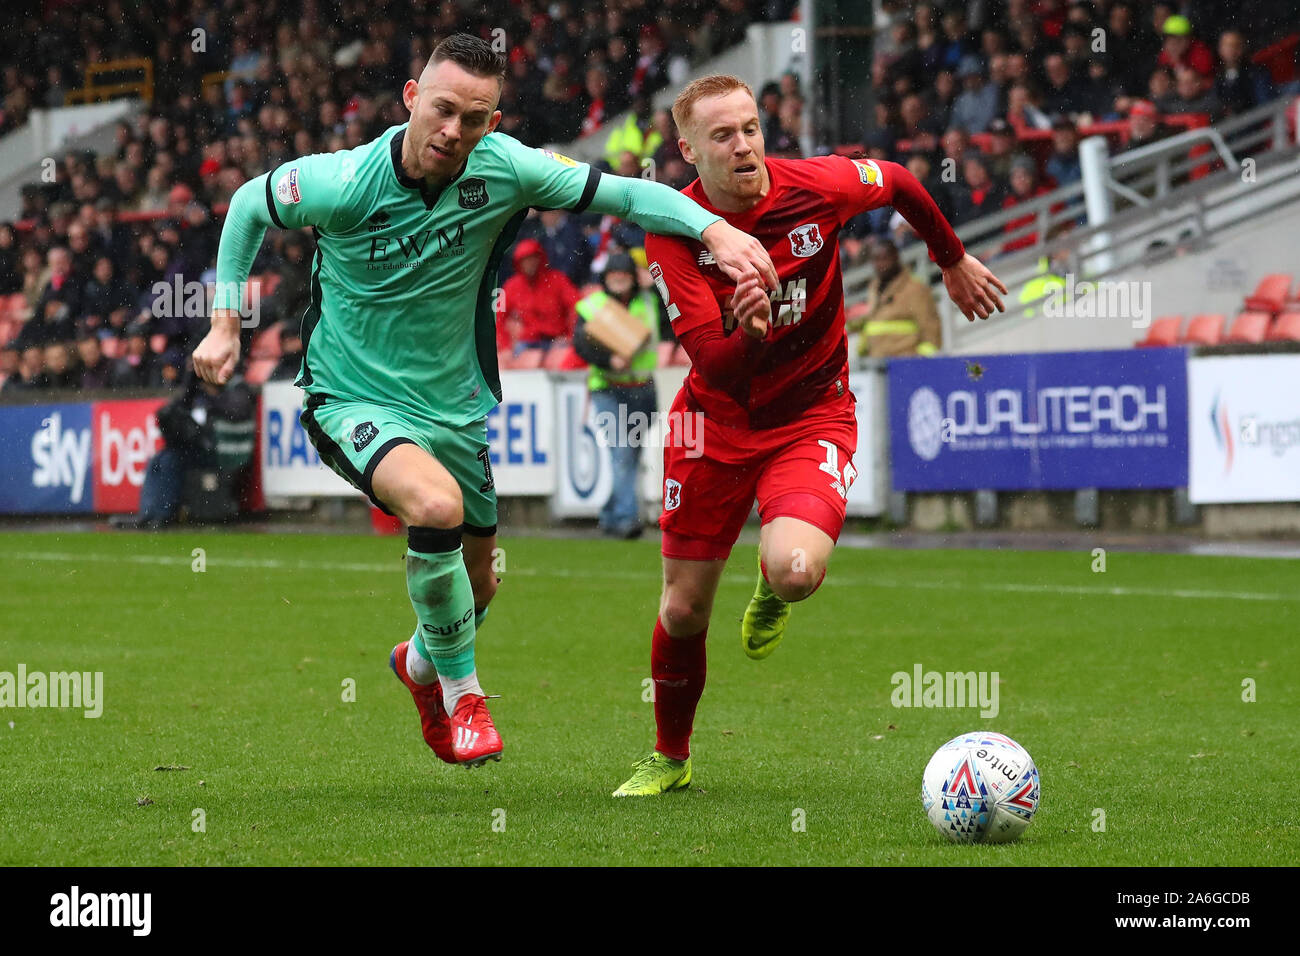 London, UK. 26th Oct, 2019. Carlisle's defender Gethin Jones and Orient's midfielder James Brophy compete for the ball during the EFL League Two match between Leyton Orient and Carlisle, at Brisbane Road, London, on 26 October 2019 Credit: Action Foto Sport/Alamy Live News Stock Photo